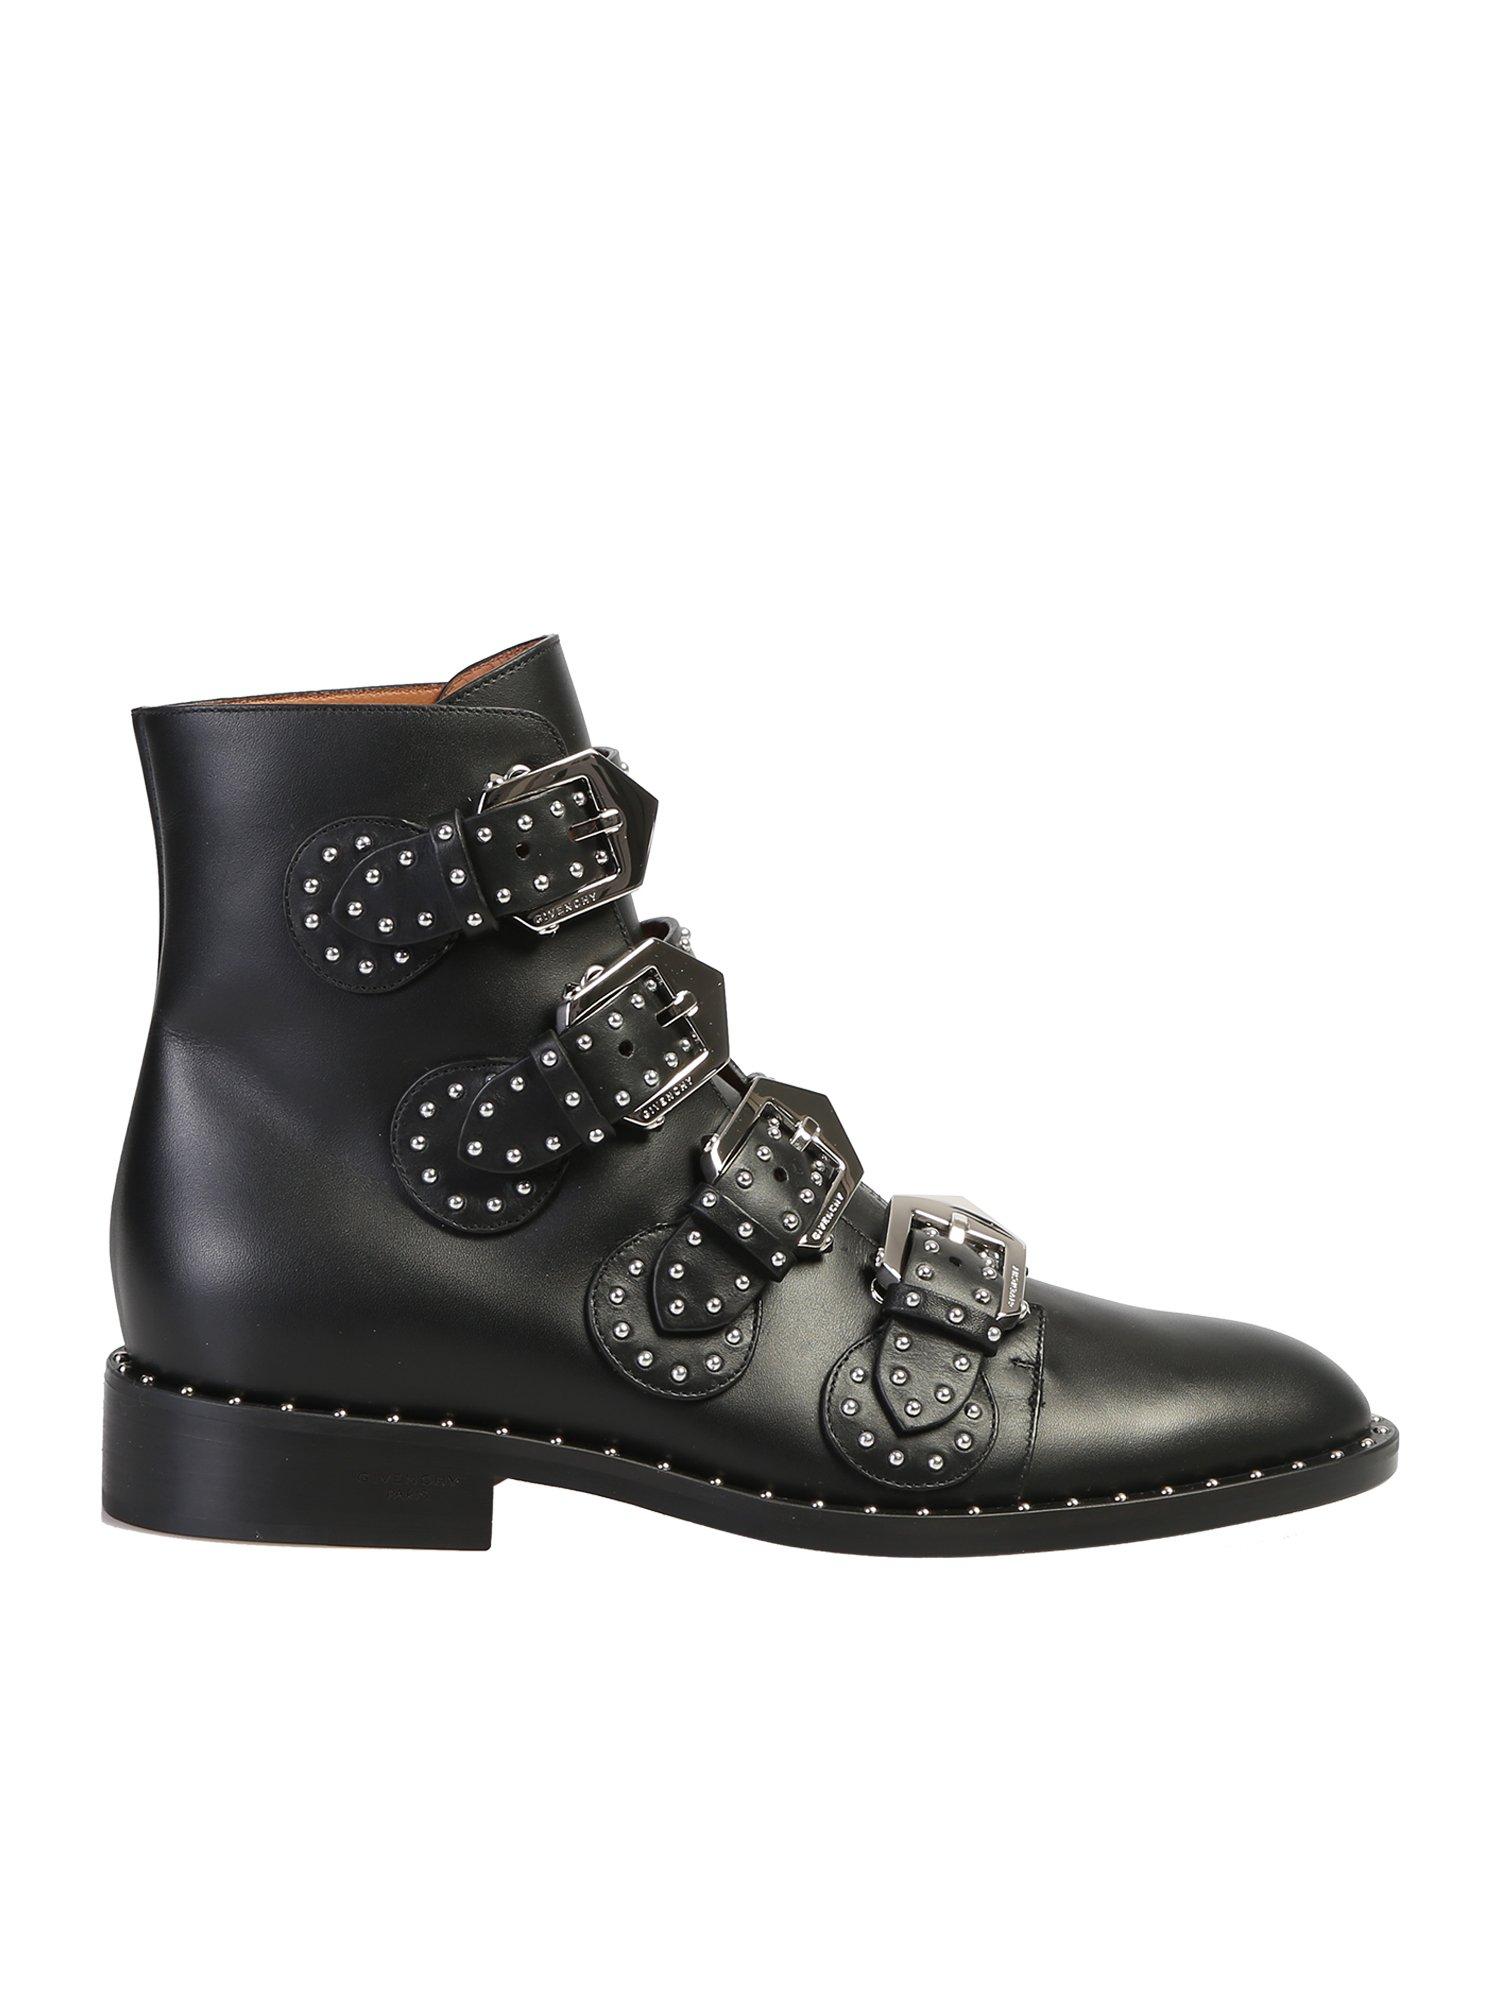 Givenchy Elegant Leather Studded Buckle Ankle Boots/booties in Nero ...